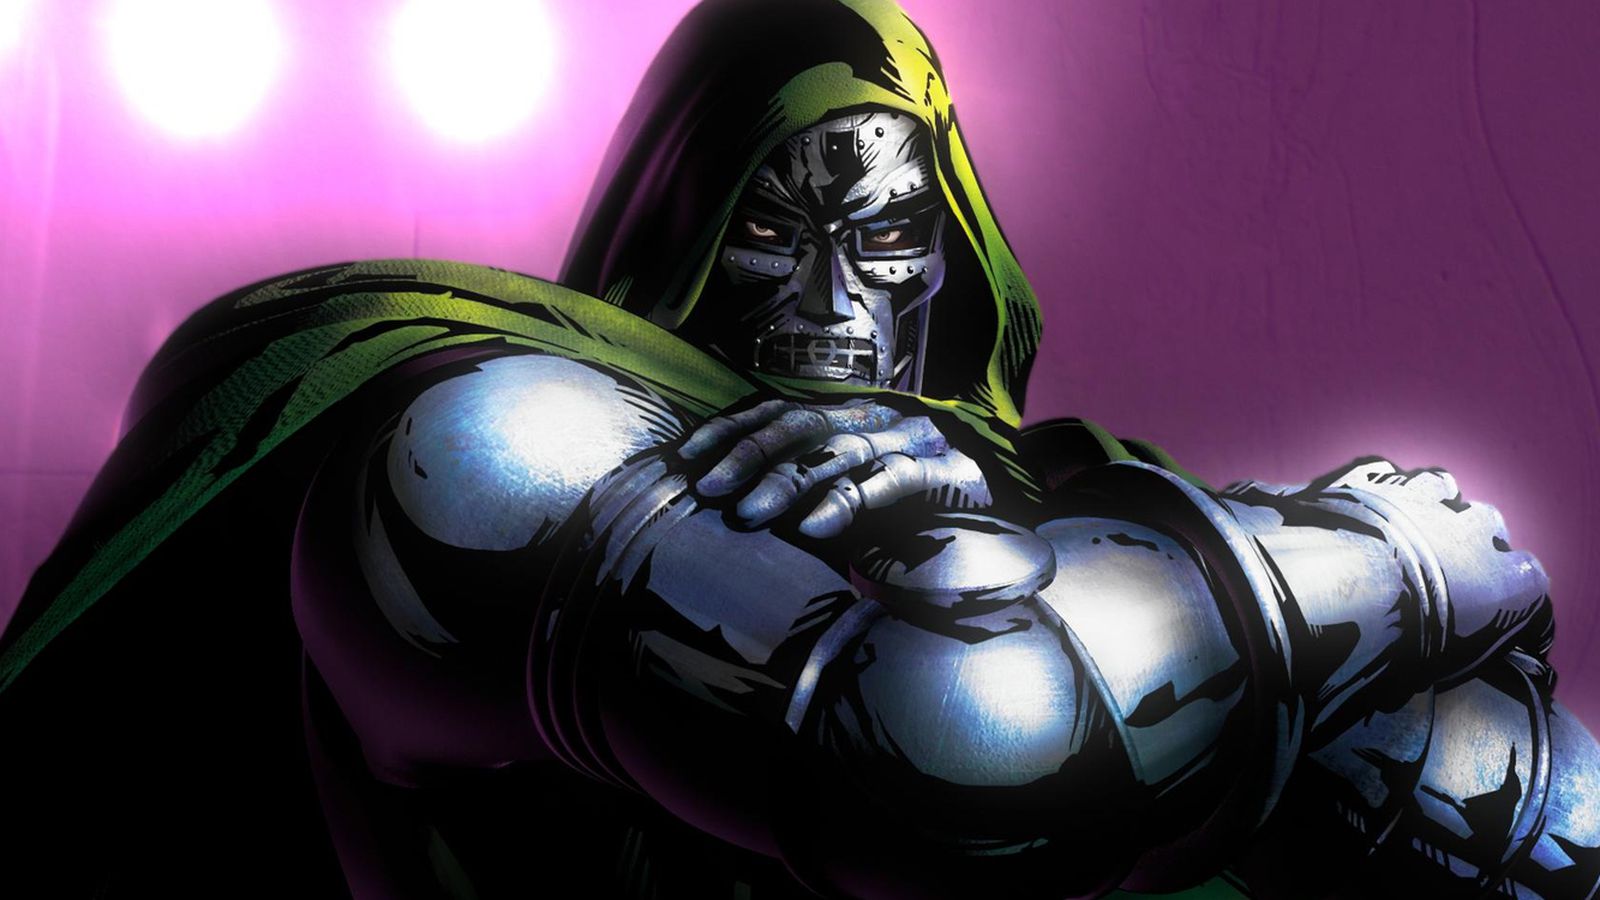 Dr. Doom as one of Top 10 Marvel Characters that deserve their own film